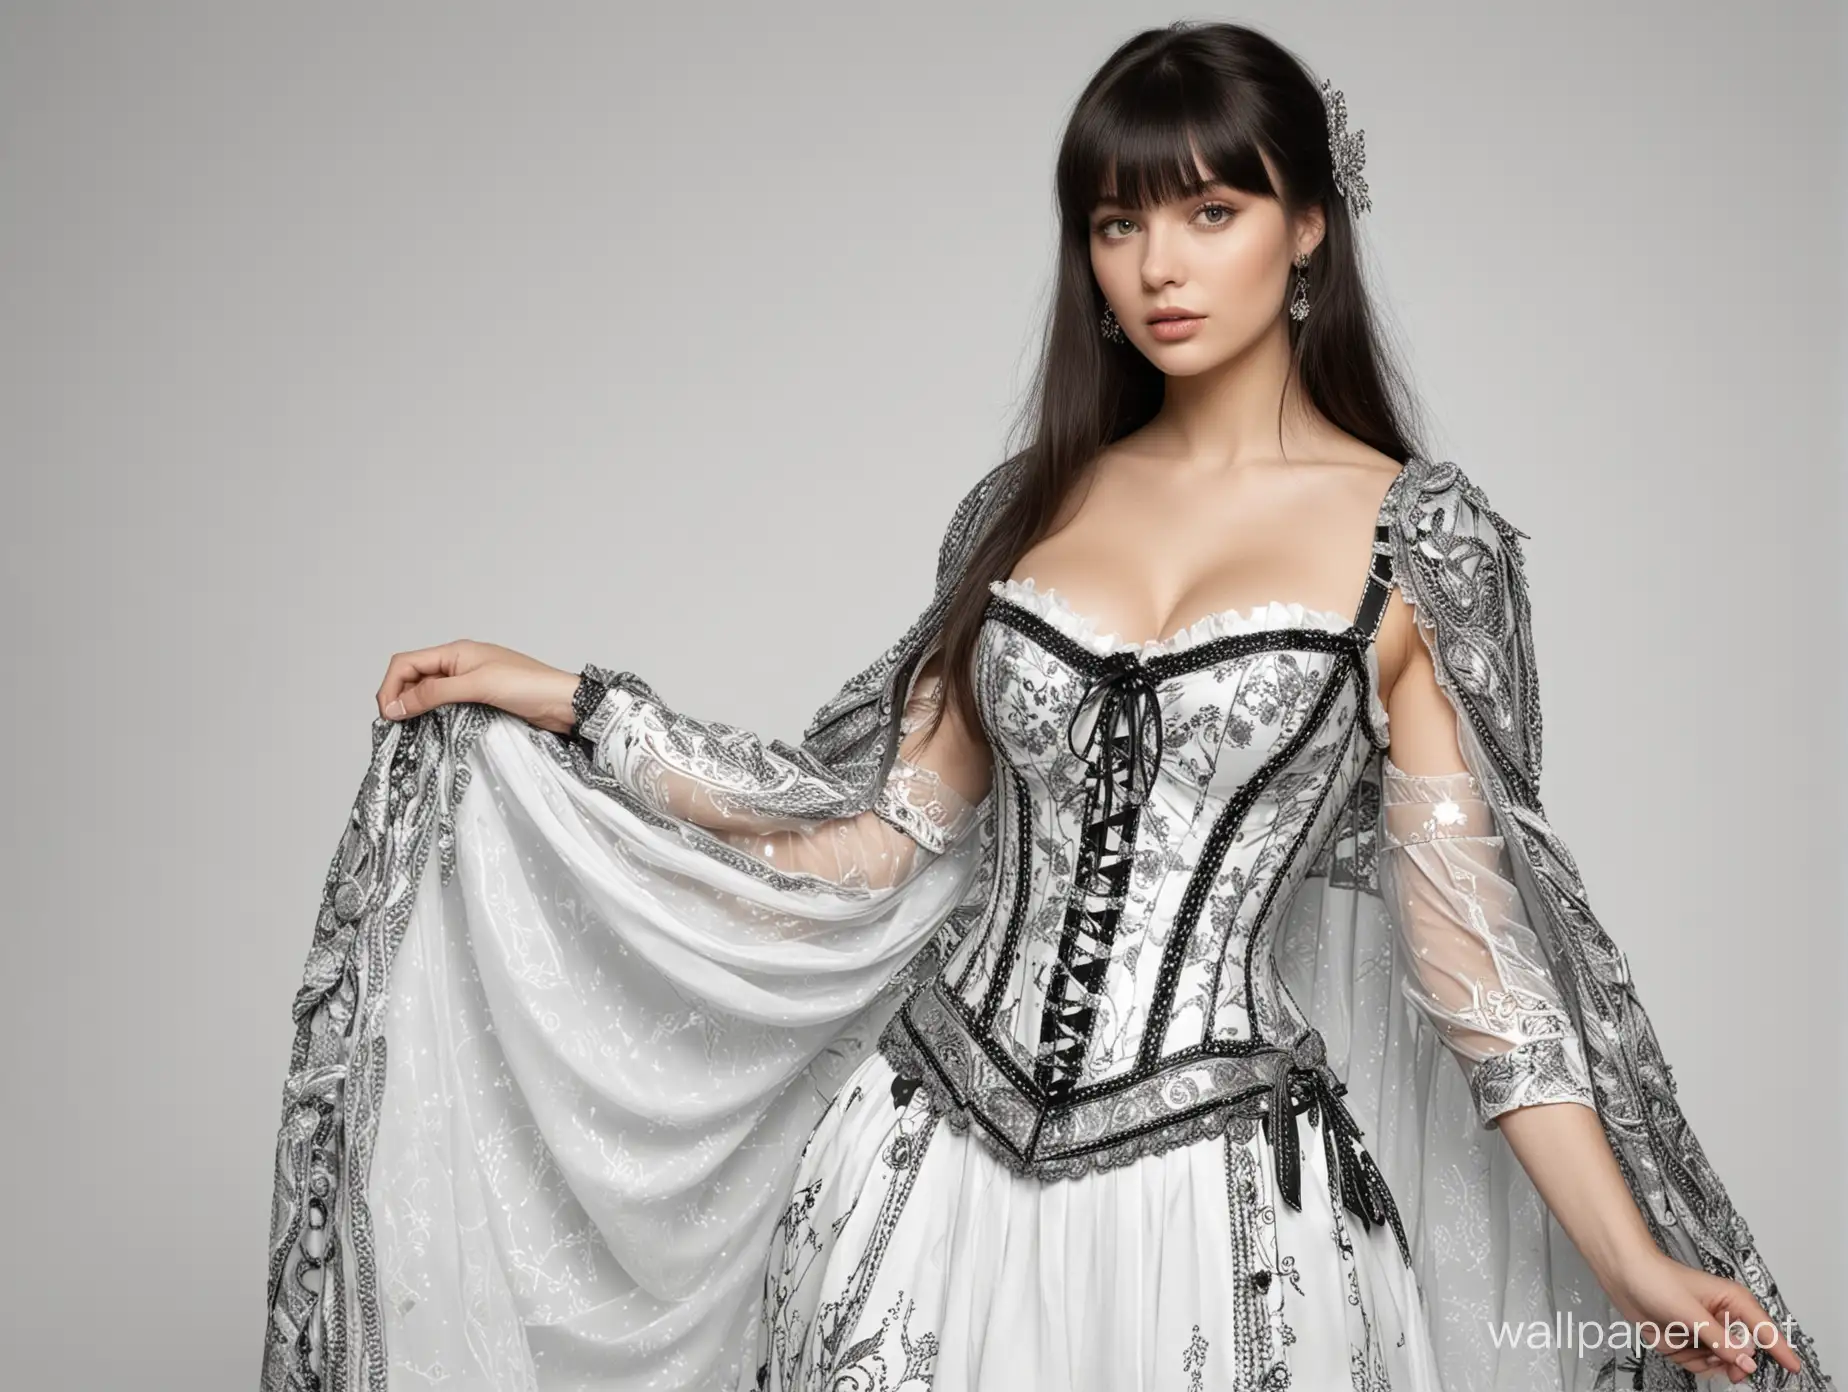 Young Irina Chashchina, a Scandinavian goddess, dark hair with bangs, large breasts of size 4, narrow waist. Bustier with lacing and decoration. Skirt with metallic overlays, a short cloak on the right shoulder, black and white sketch, white background. Nude-magic style.